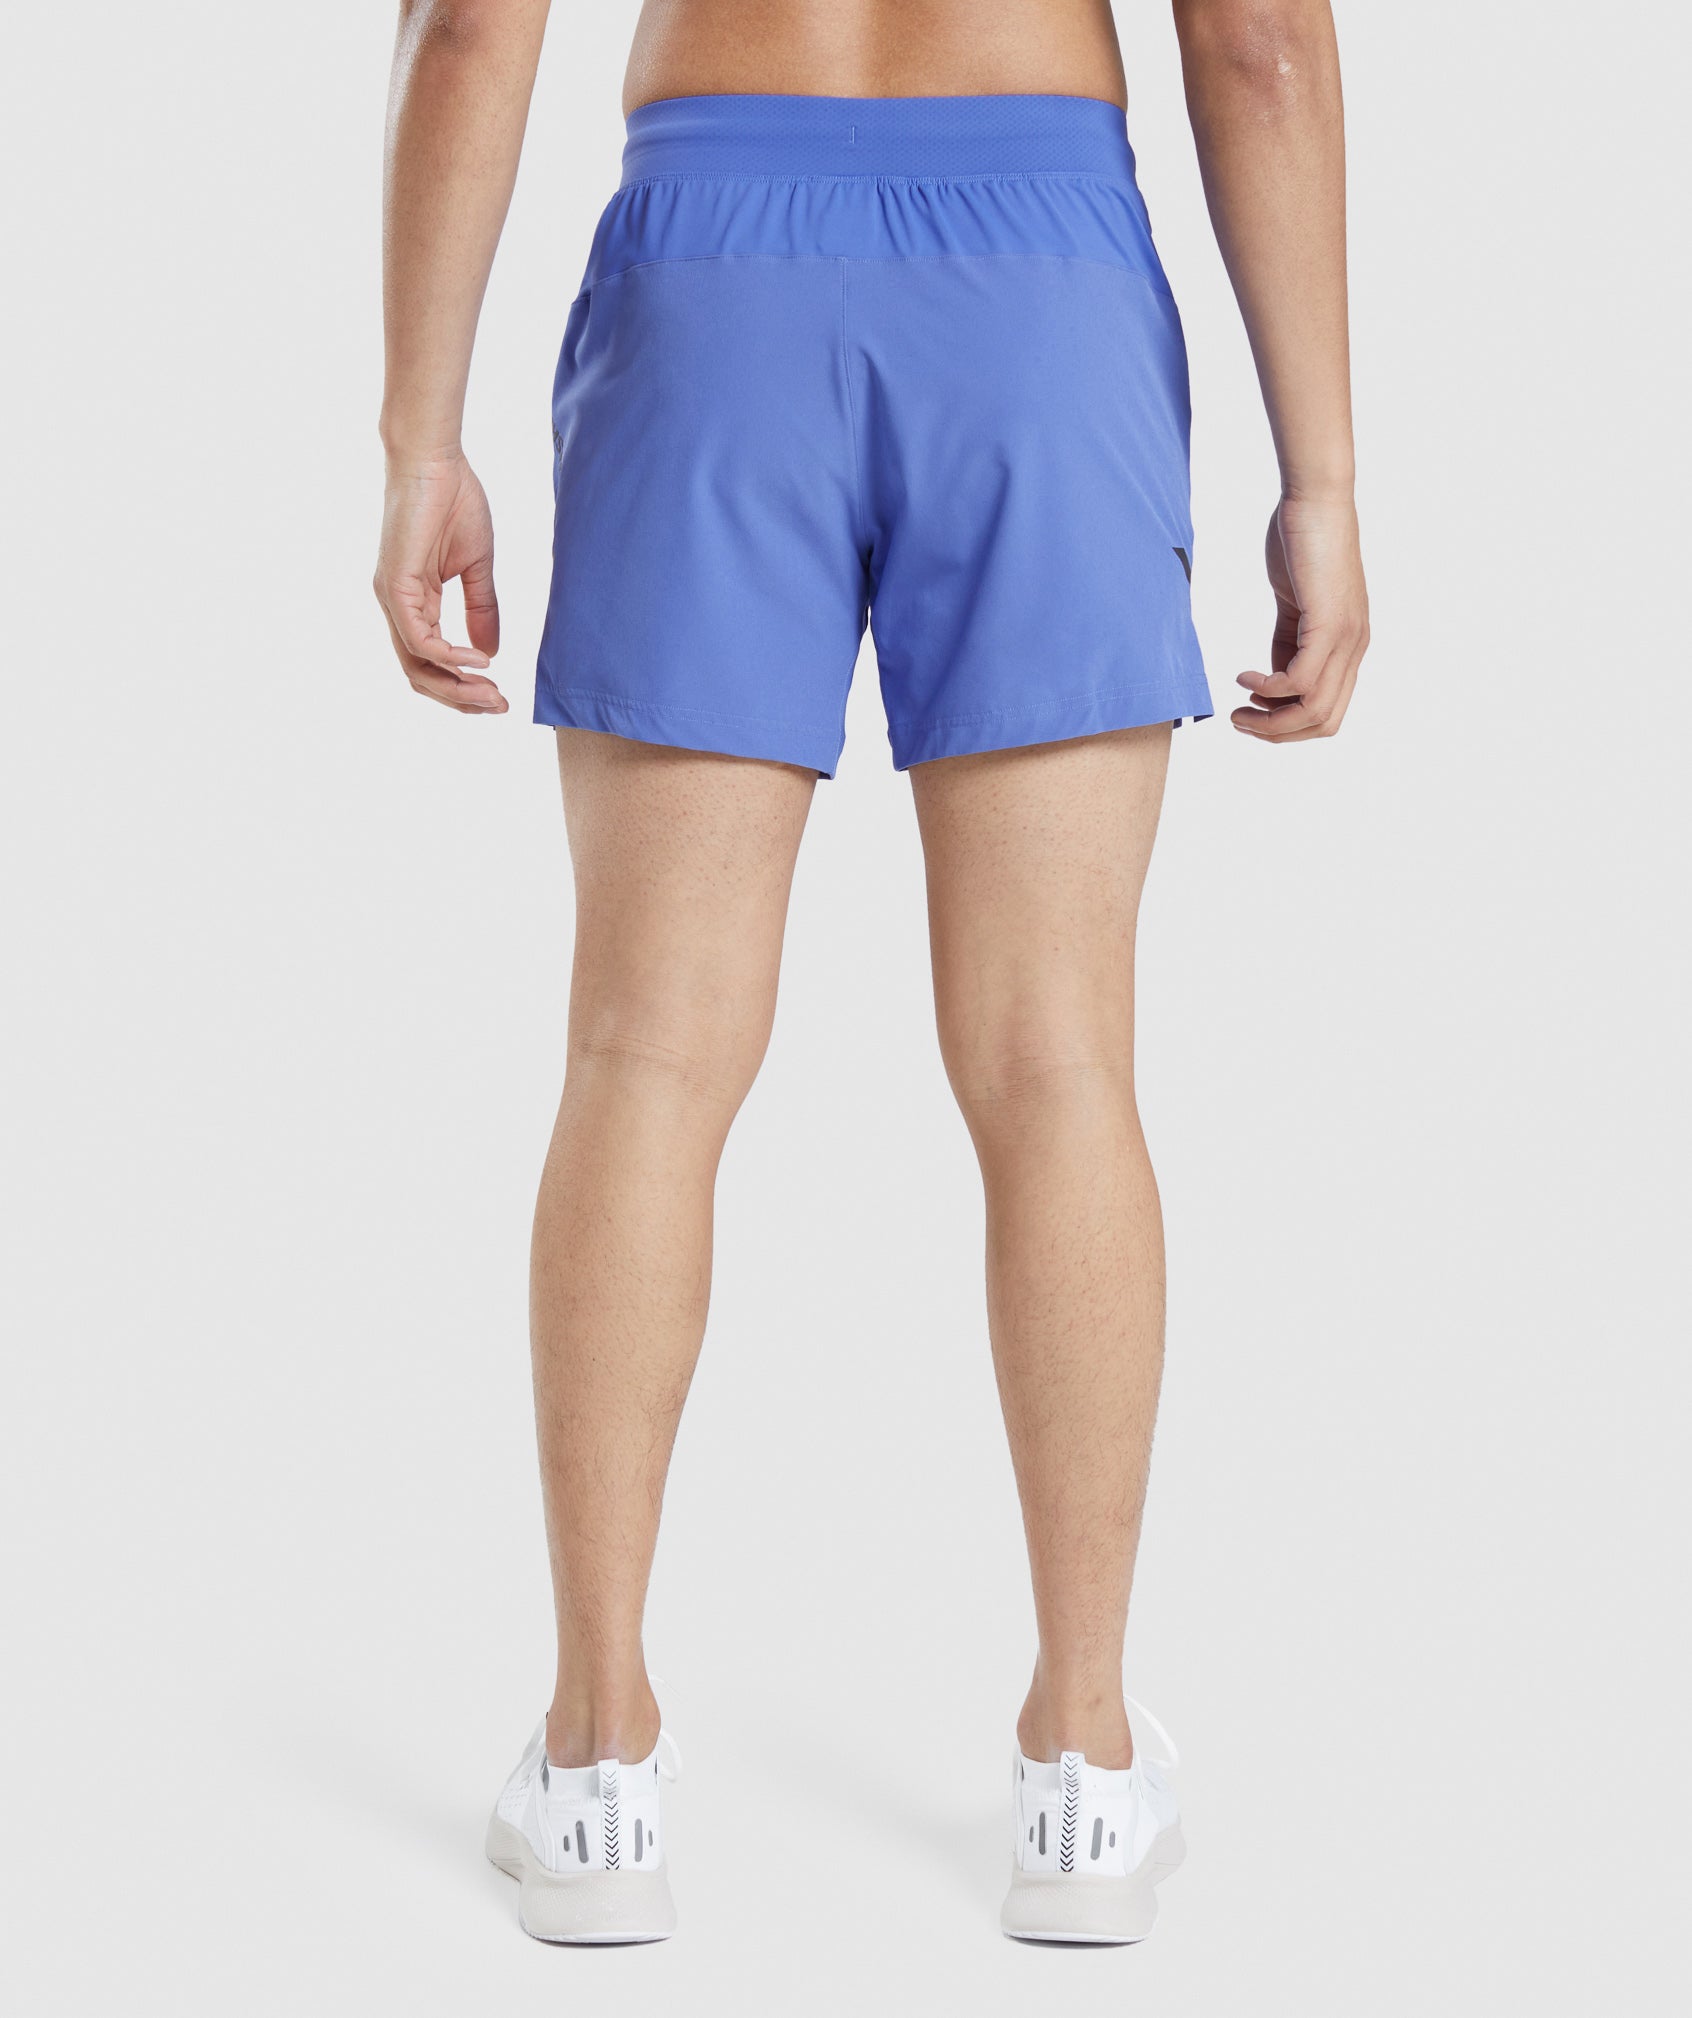 Apex 5" Perform Shorts in Court Blue - view 3